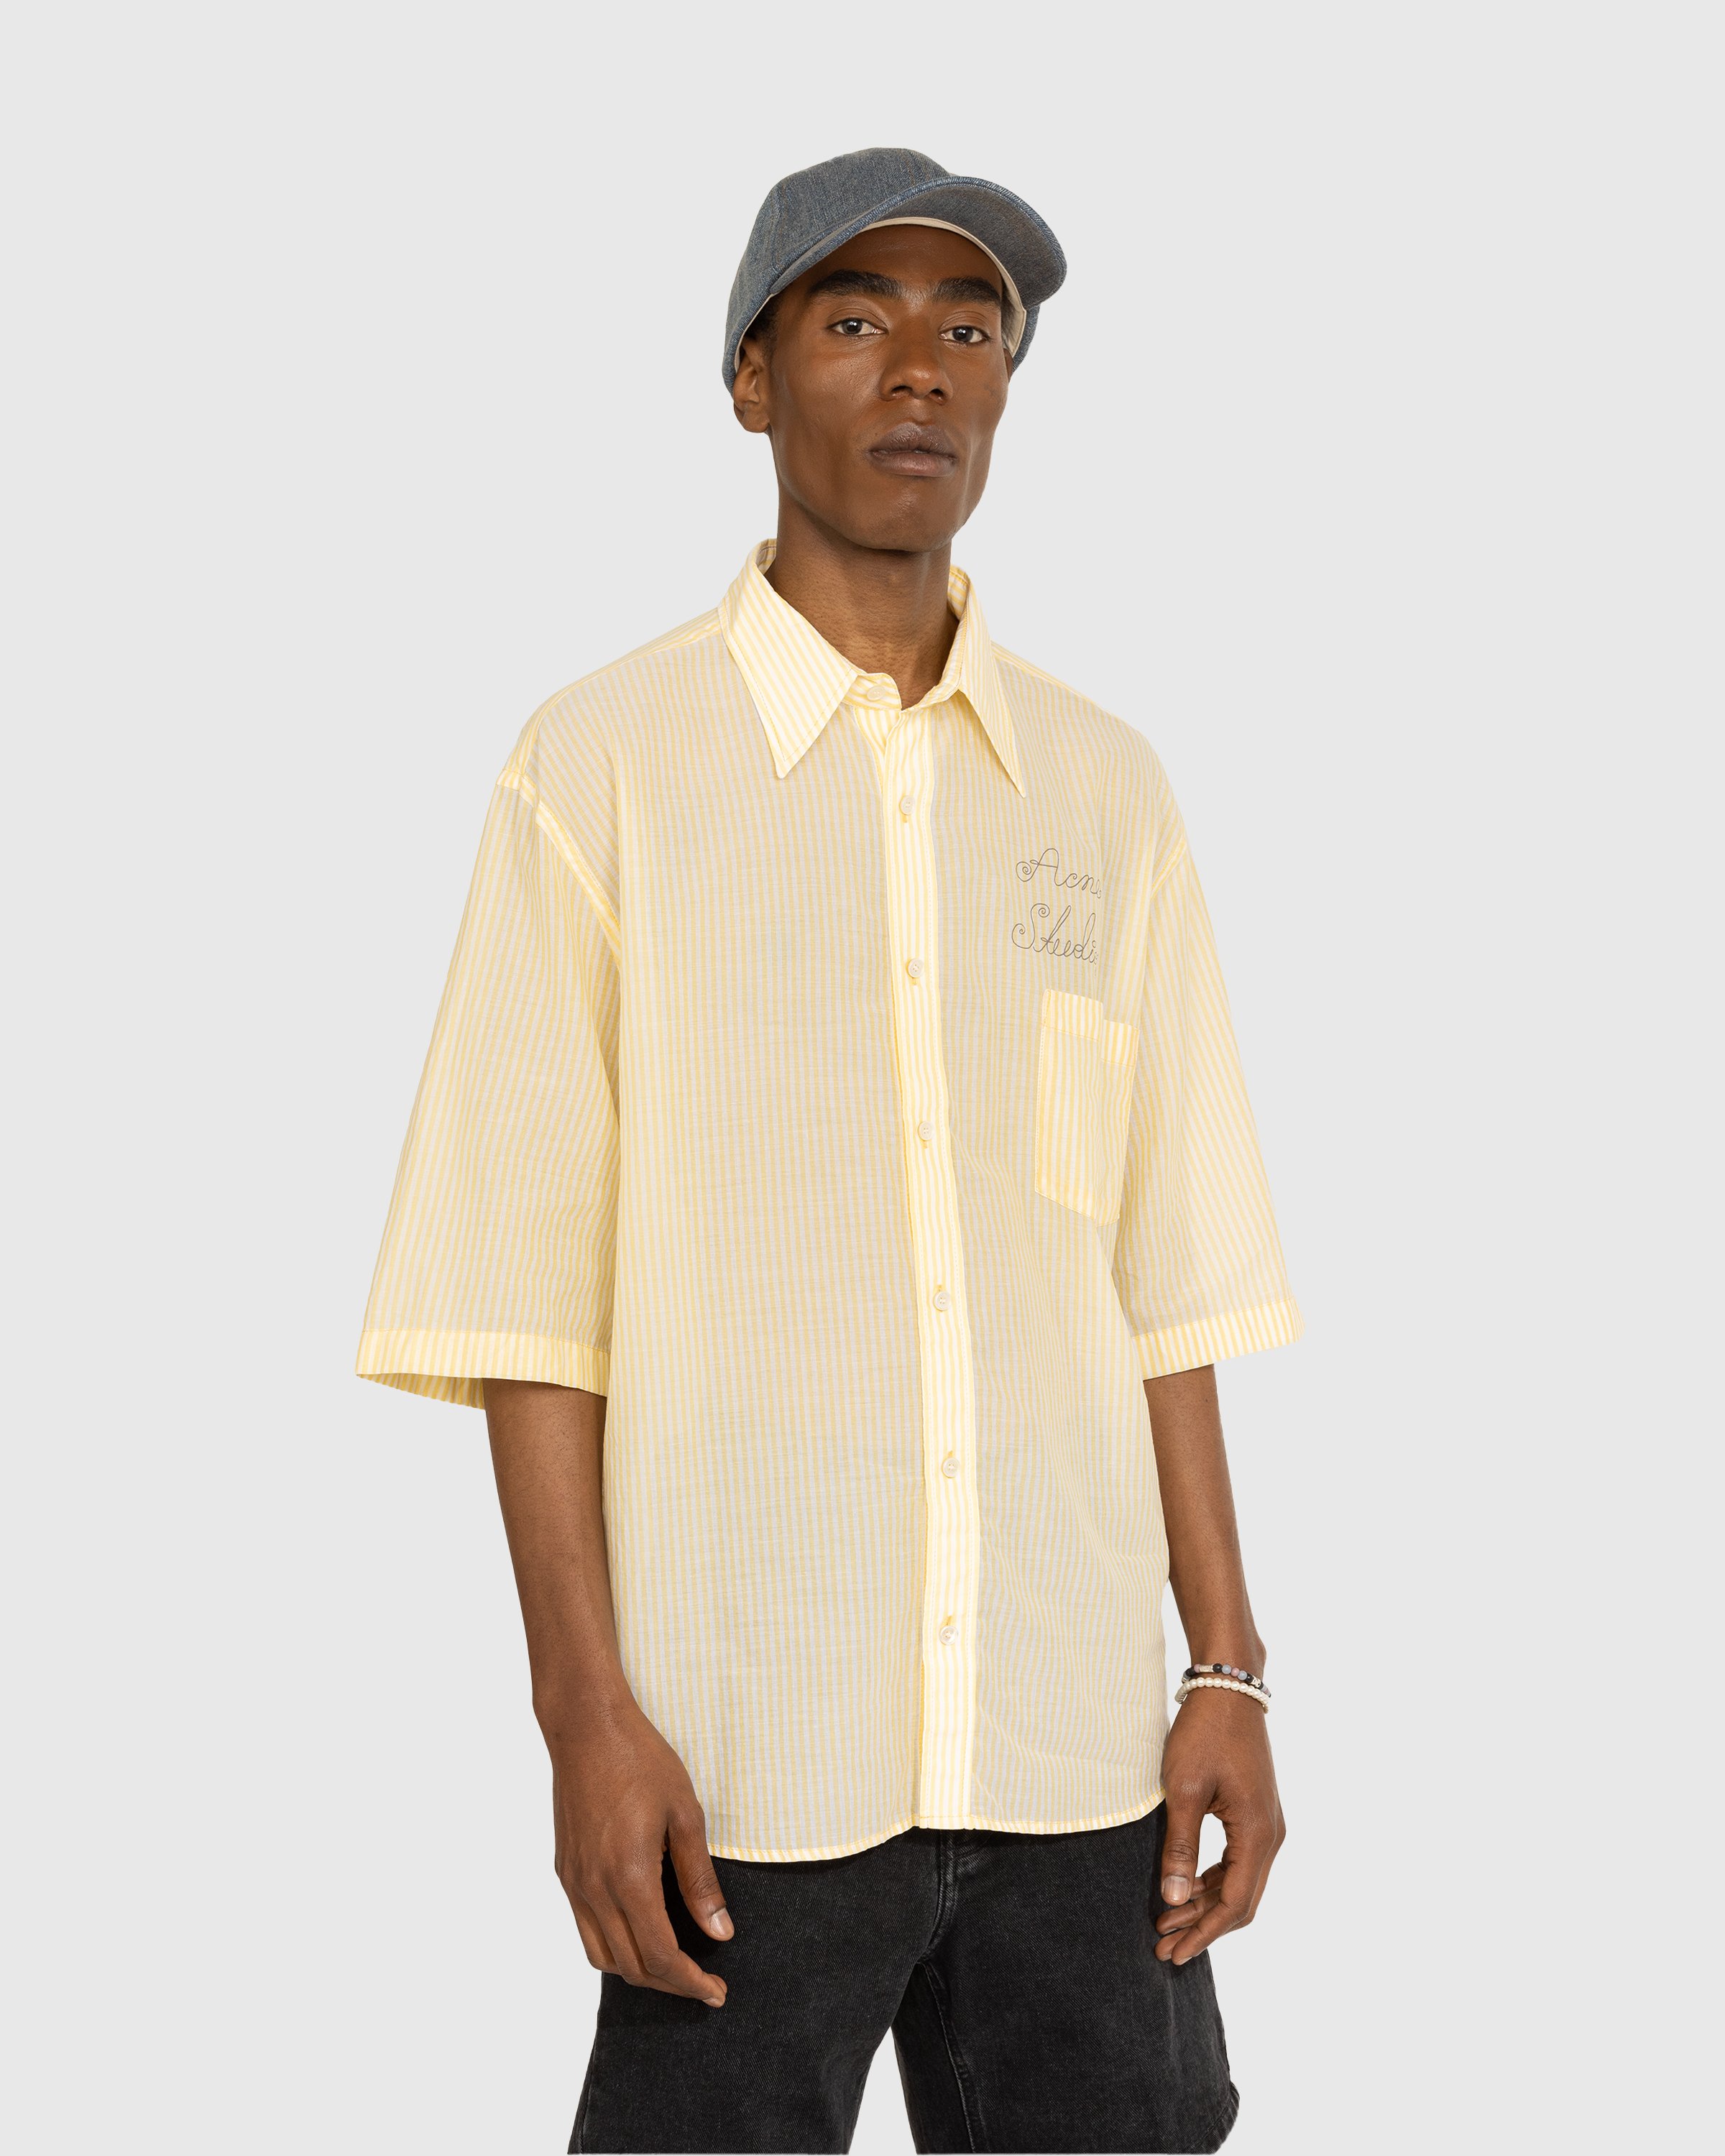 Acne Studios - Short Sleeve Button-Up Shirt Yellow - Clothing - Yellow - Image 2